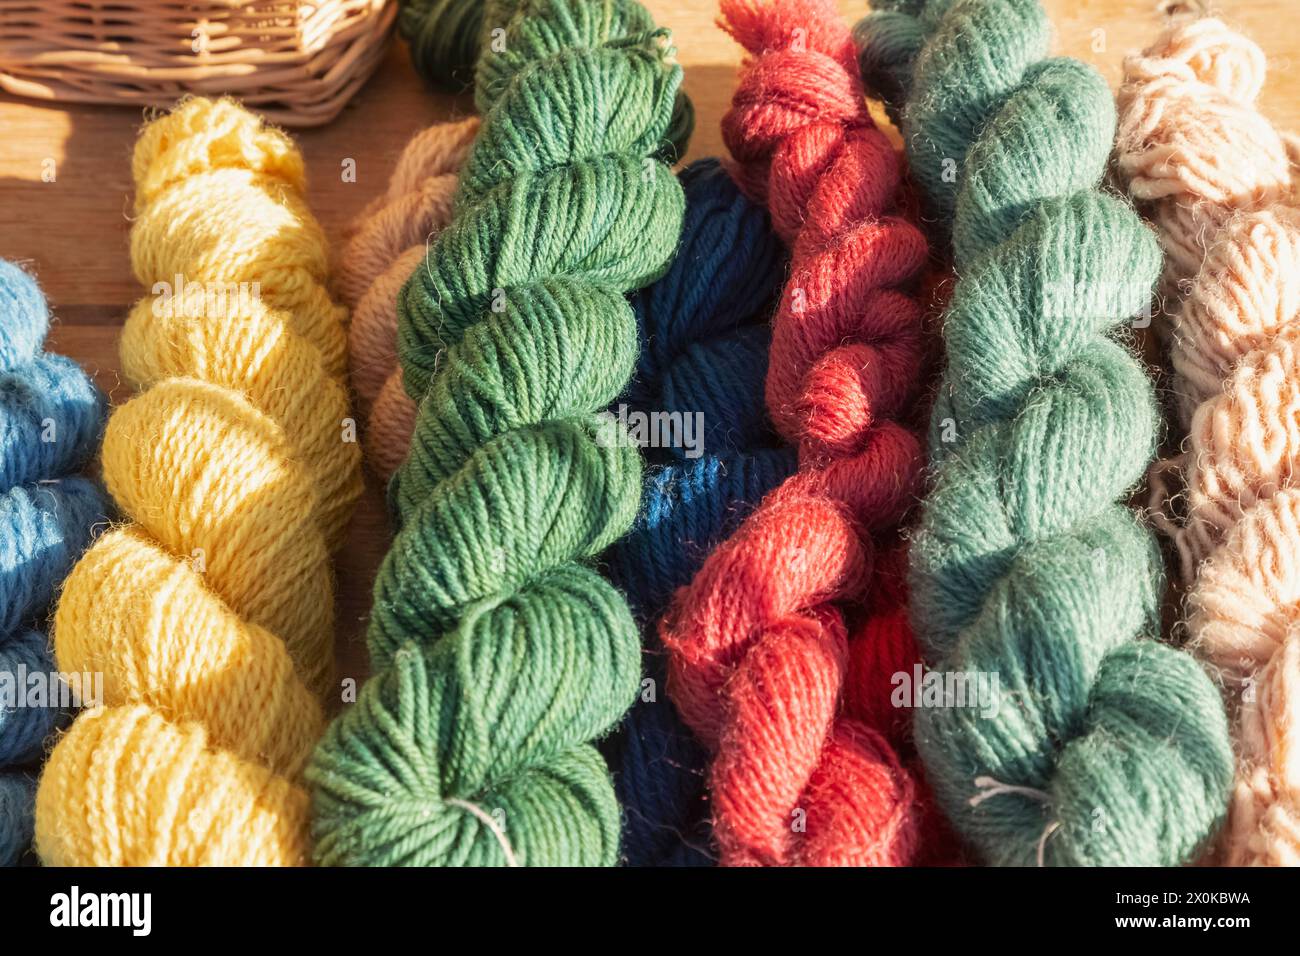 England, East Sussex, Battle, The Annual October Battle of Hastings Re-enactment Festival, Display of Colourful Wool for Sale Stock Photo